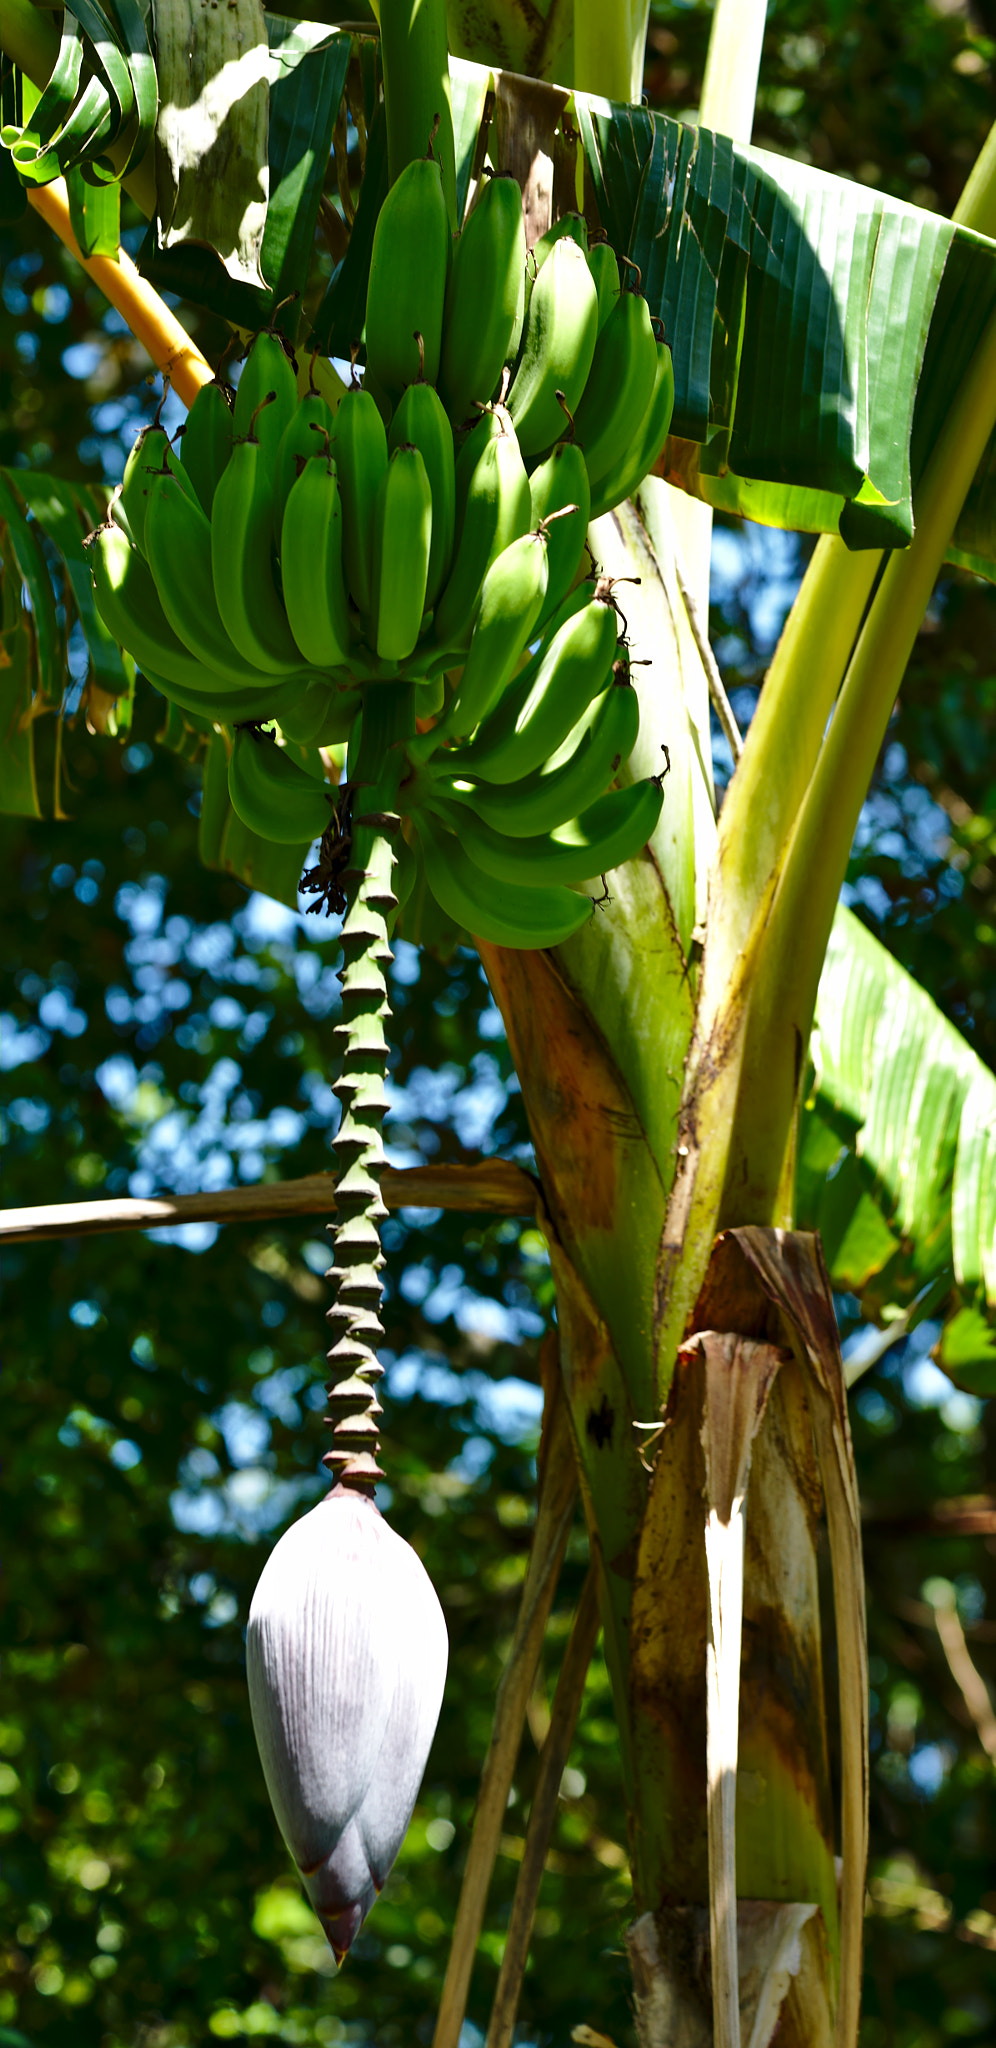 ZEISS Otus 85mm F1.4 sample photo. Wild bananas with inflorescence photography